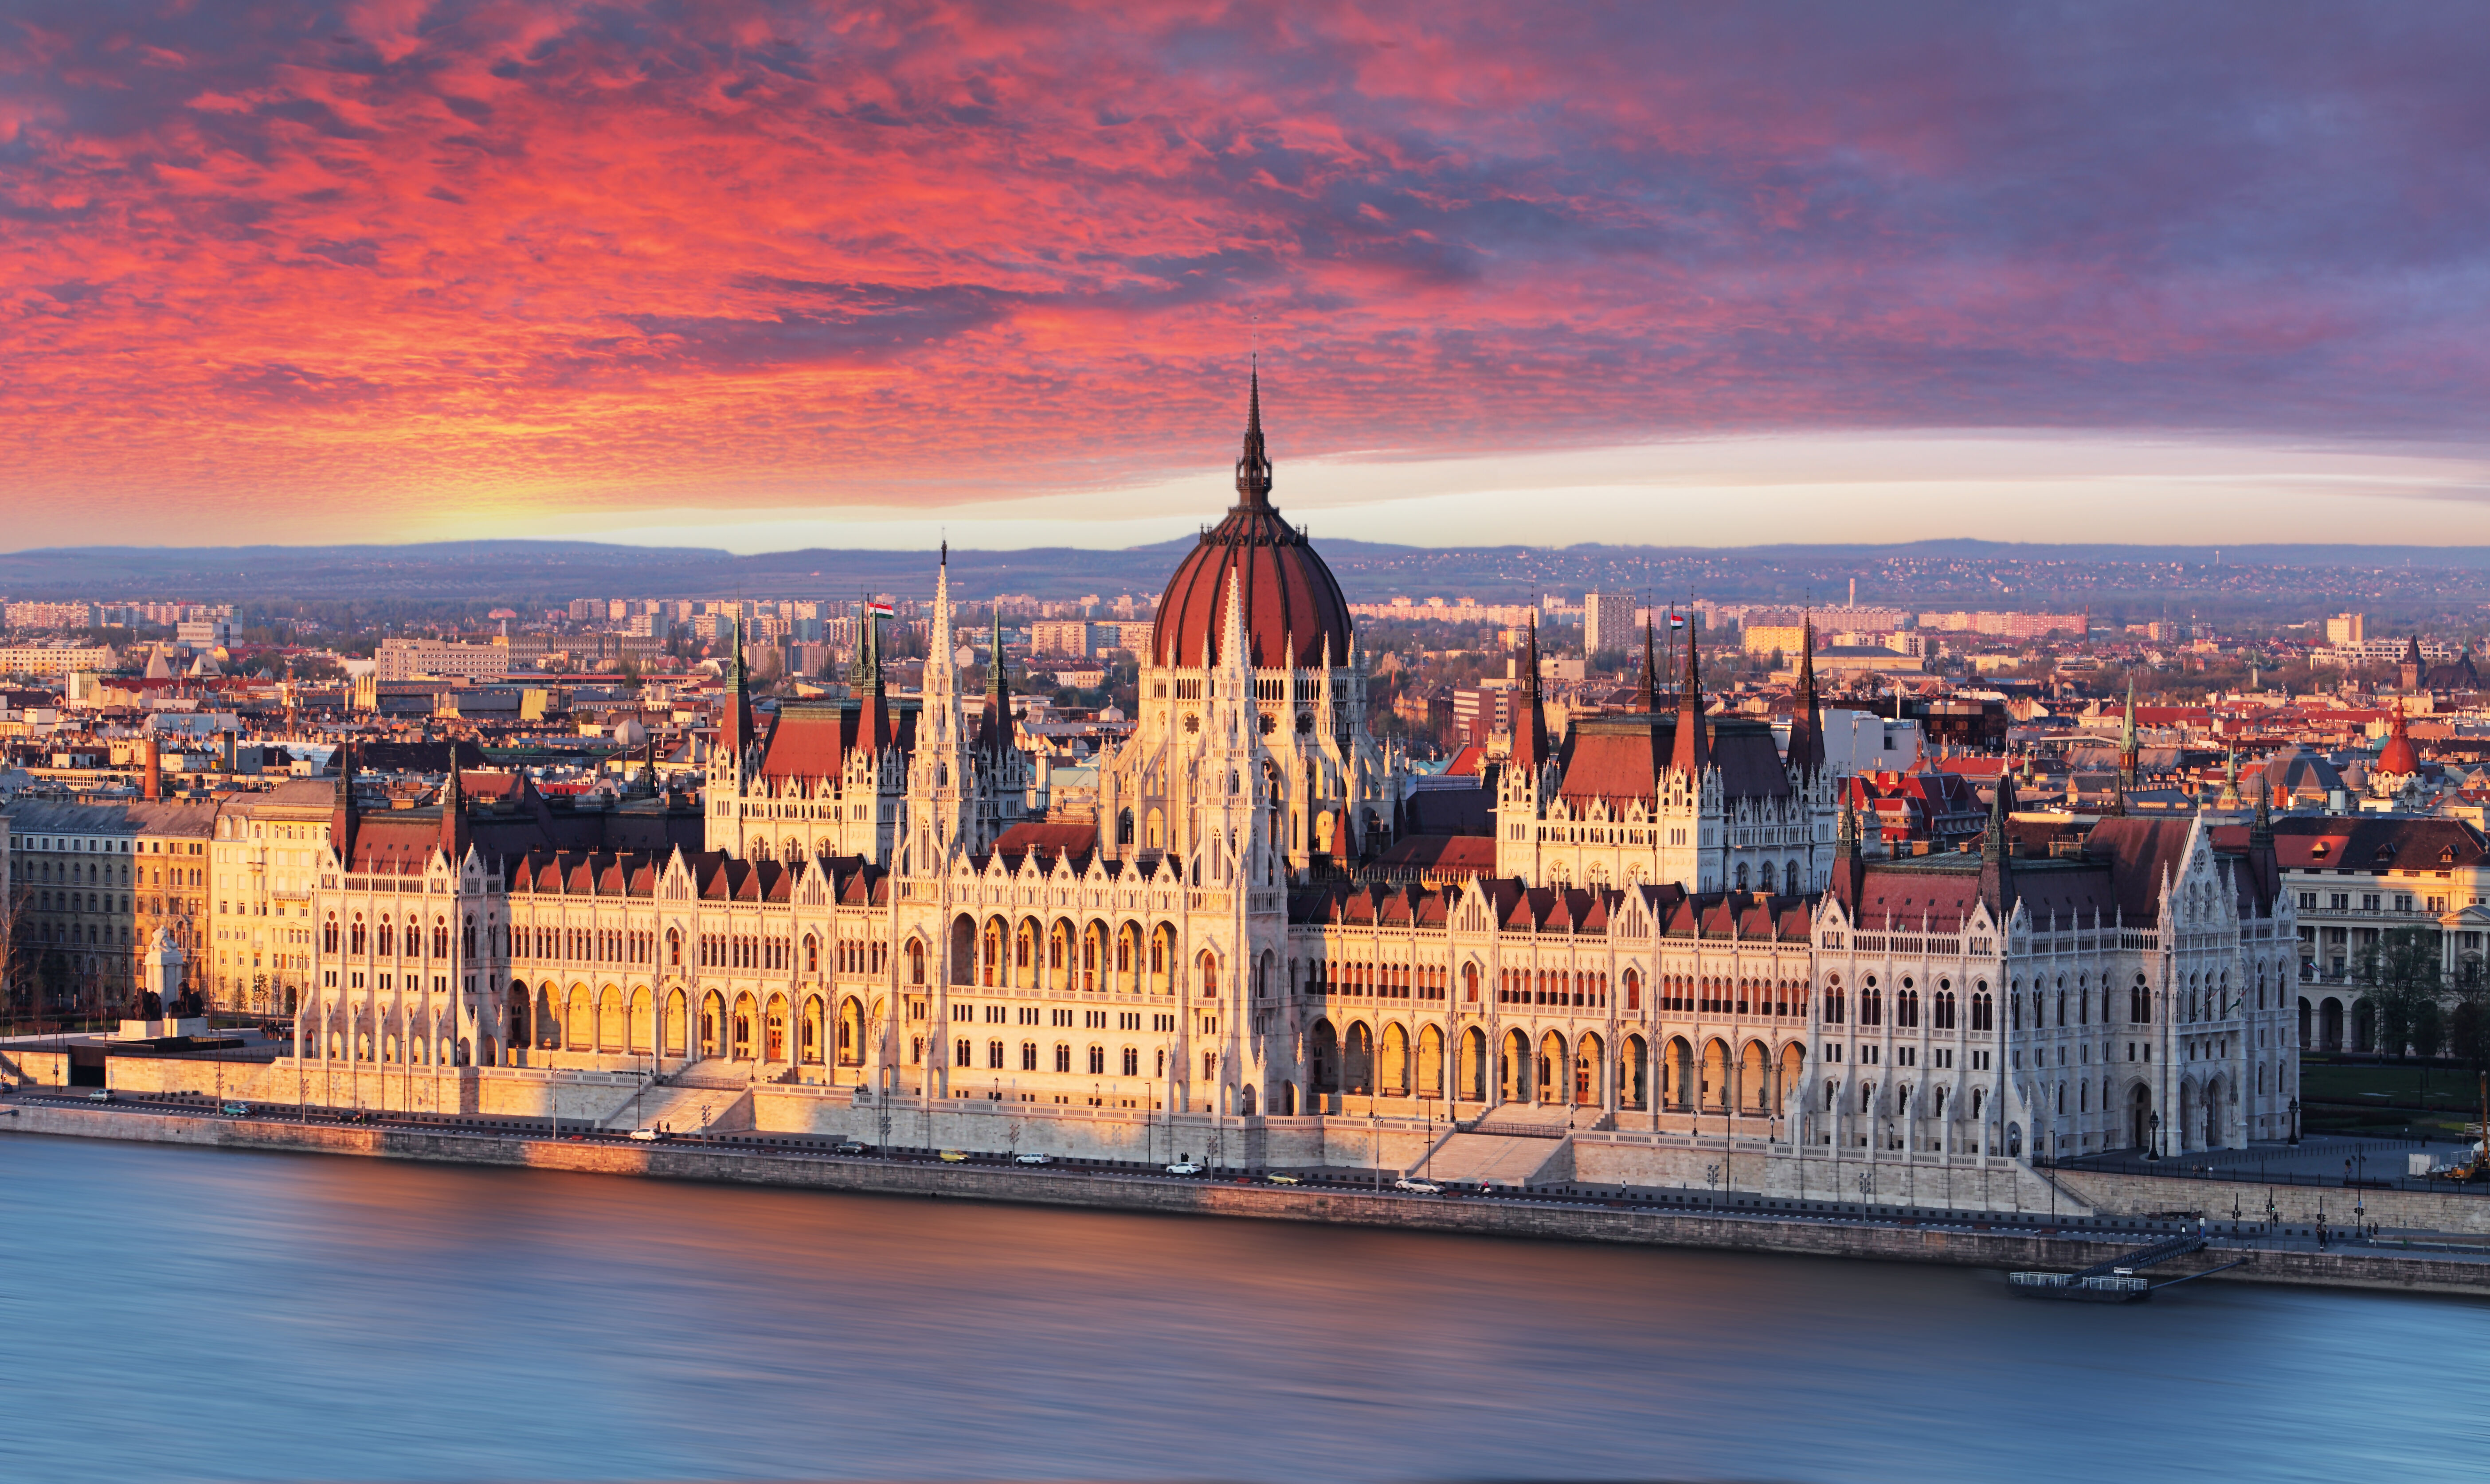 Magnificent Cities of Central & Eastern Europe featuring Berlin, Prague, Vienna, Budapest, Krakow & Warsaw